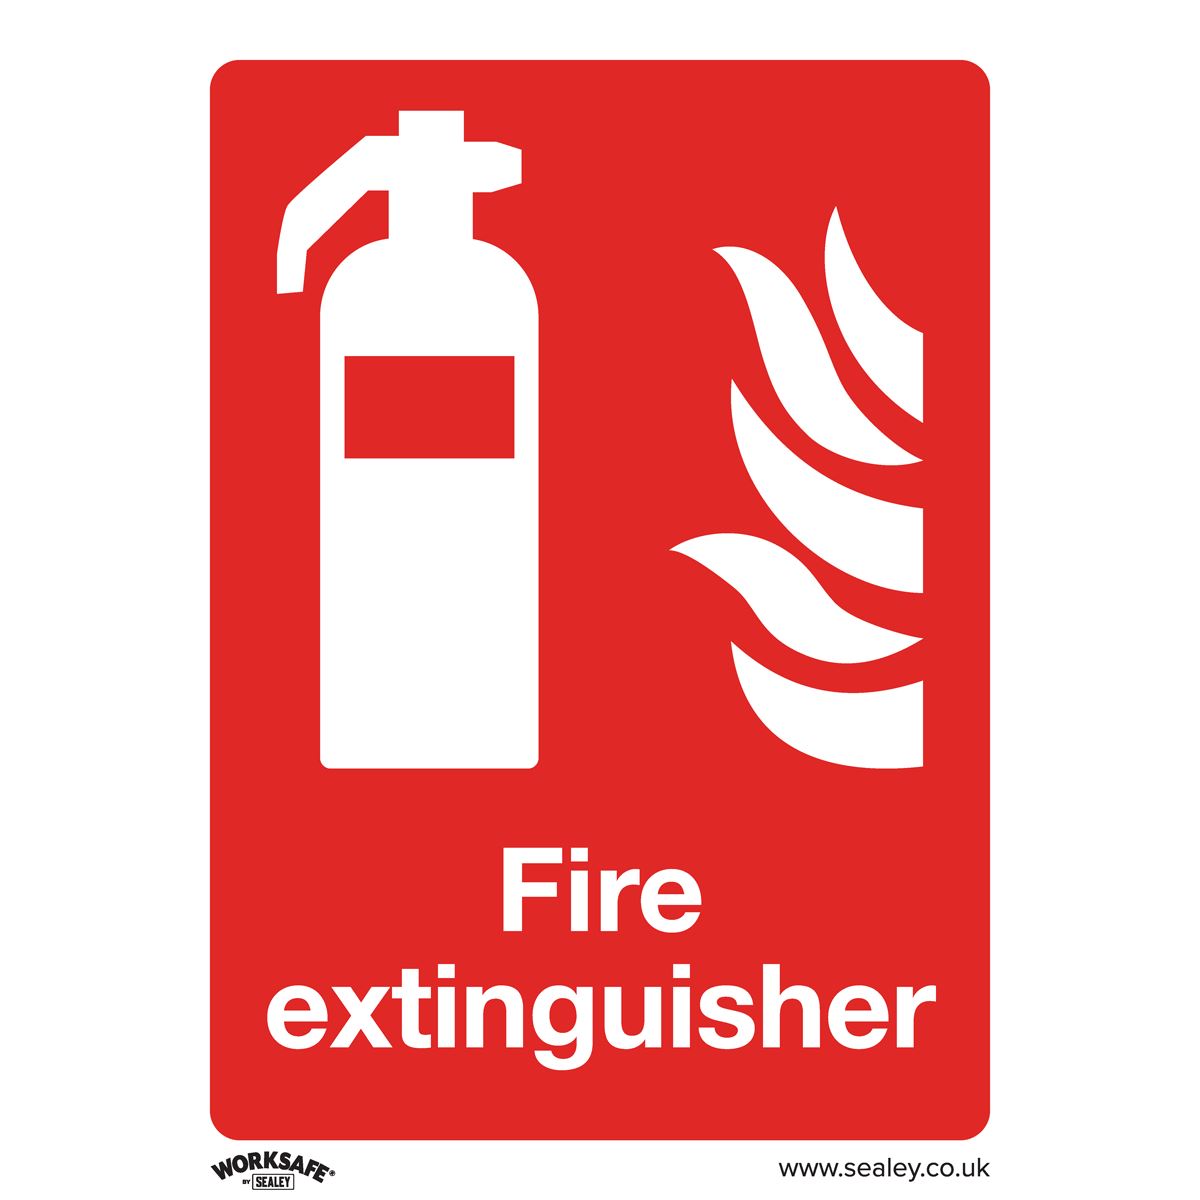 Worksafe by Sealey Prohibition Safety Sign - Fire Extinguisher - Self-Adhesive Vinyl - Pack of 10